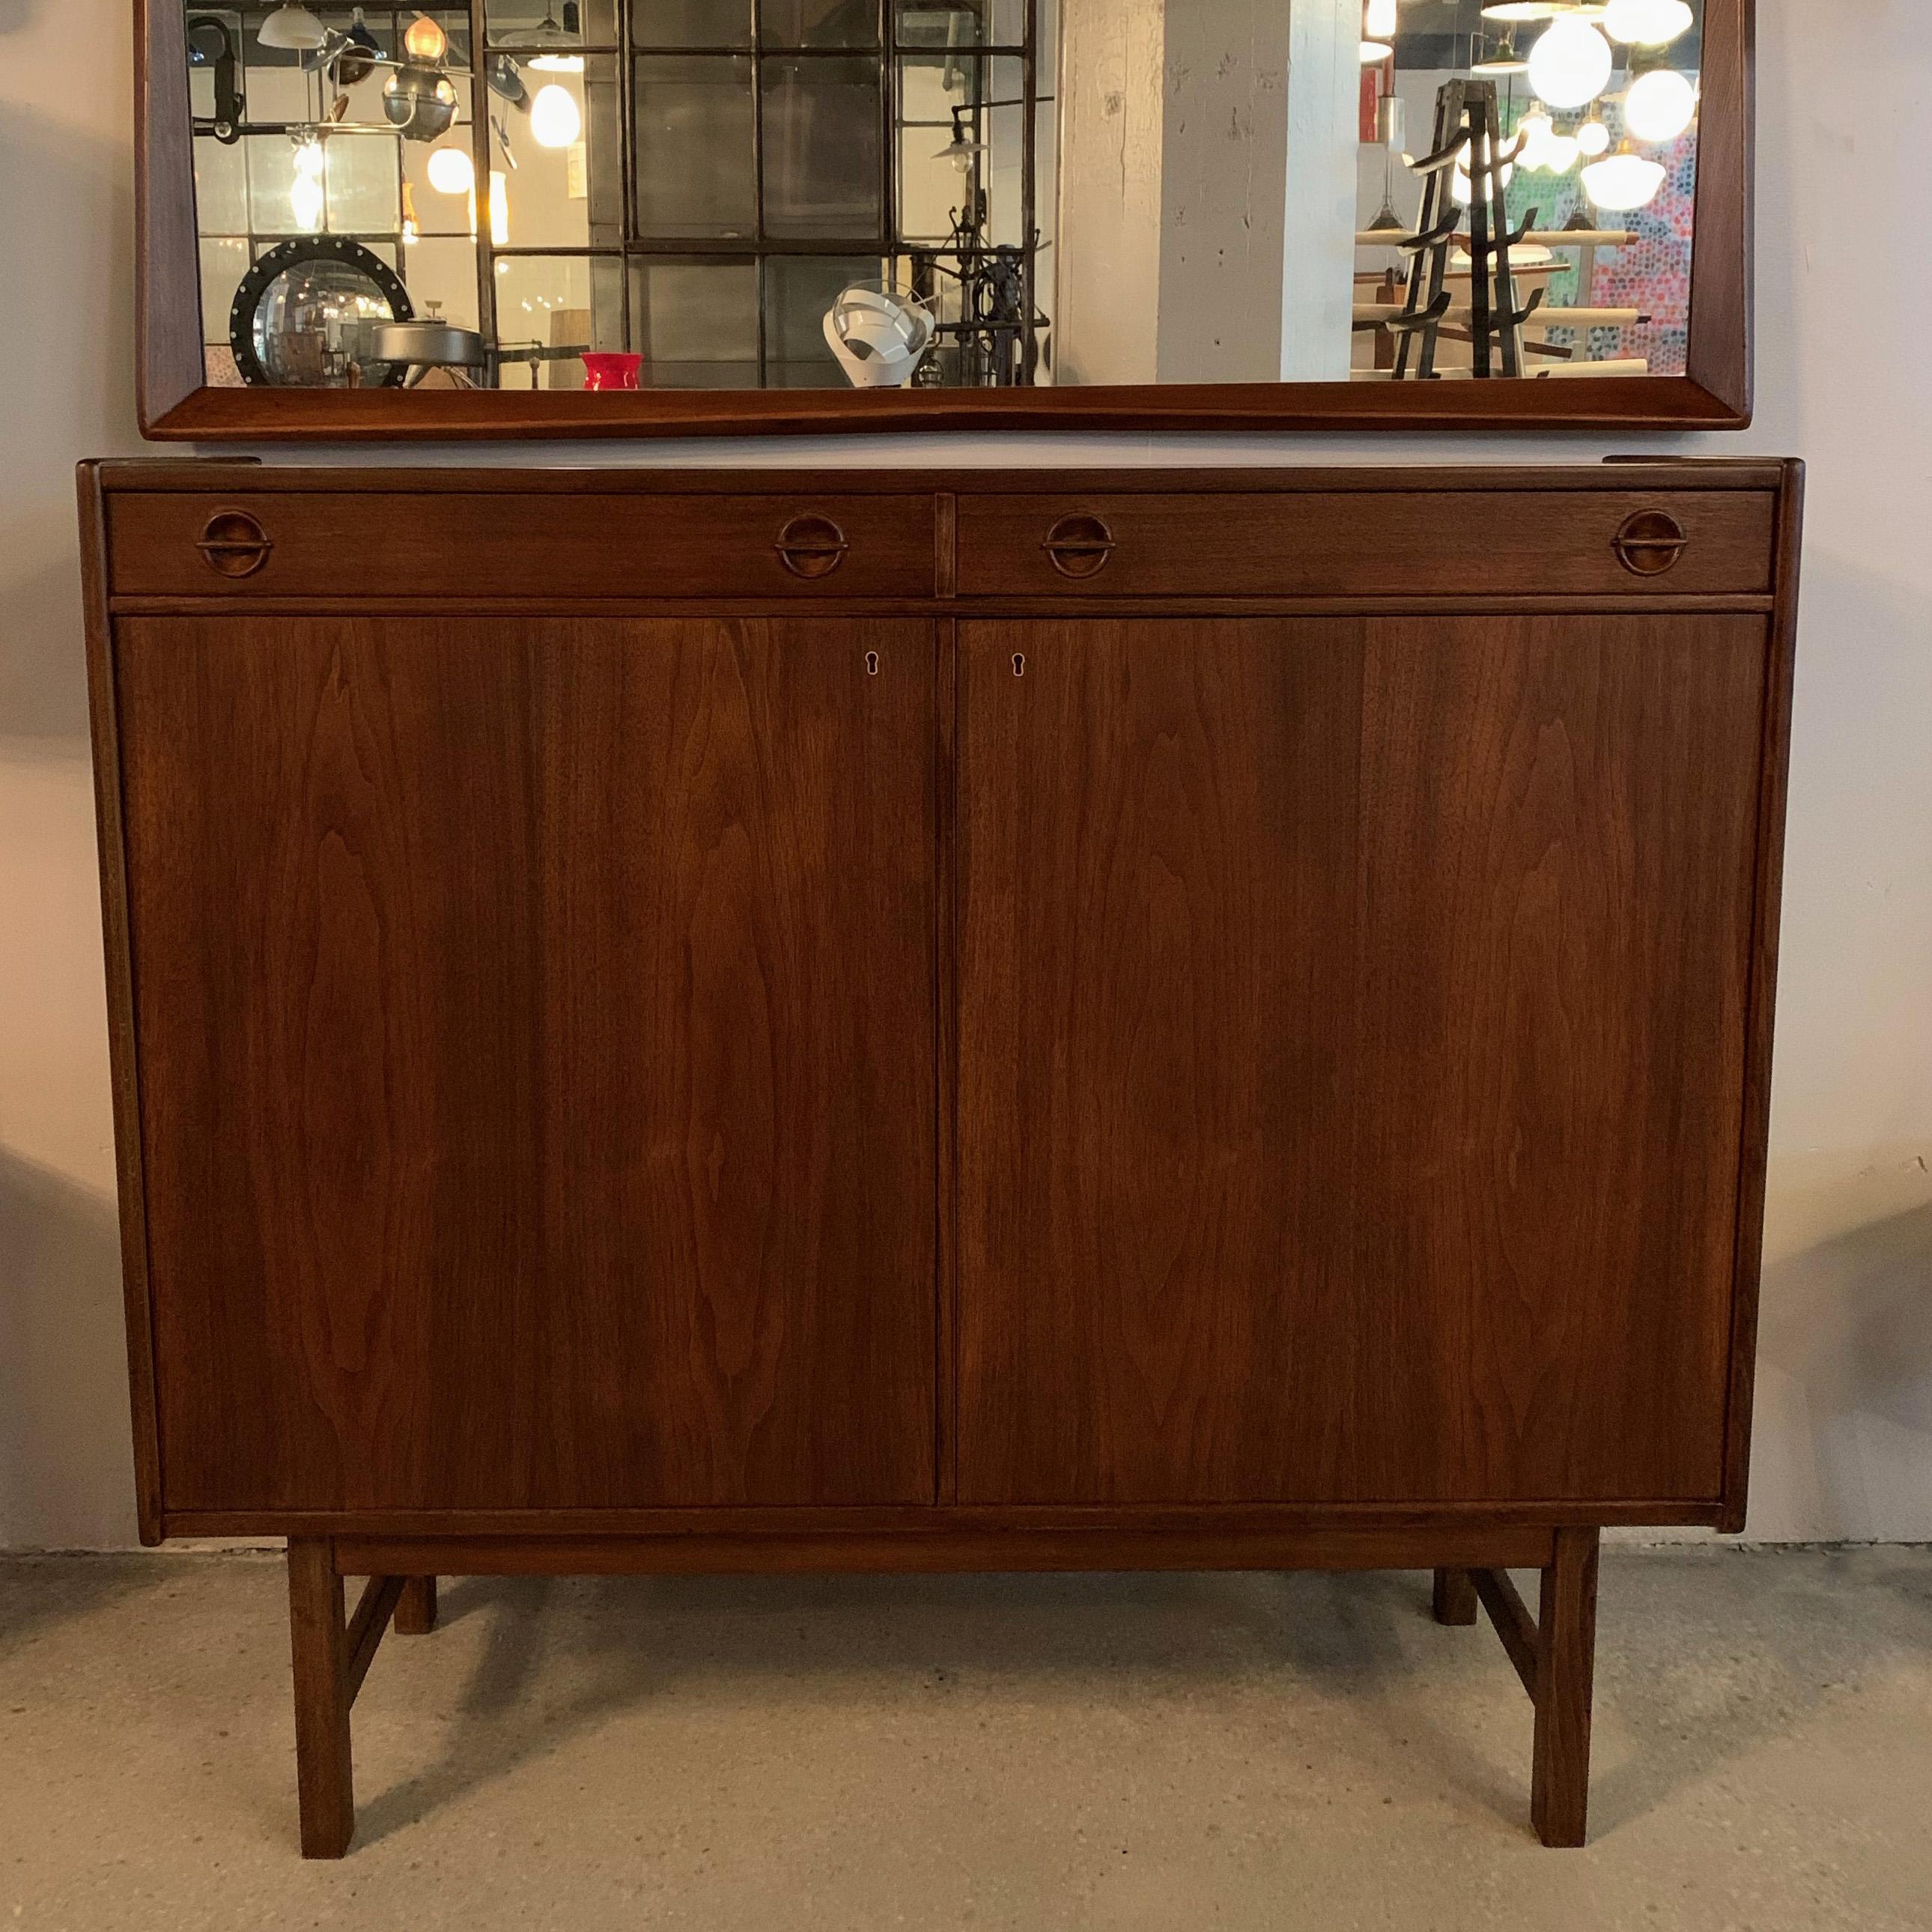 Tall, Danish modern, sideboard cabinet is a great size at 4ft wide and 17 inches deep. The interior bottom sections measure 26.5 height x 23 width inches each with adjustable interior shelves.